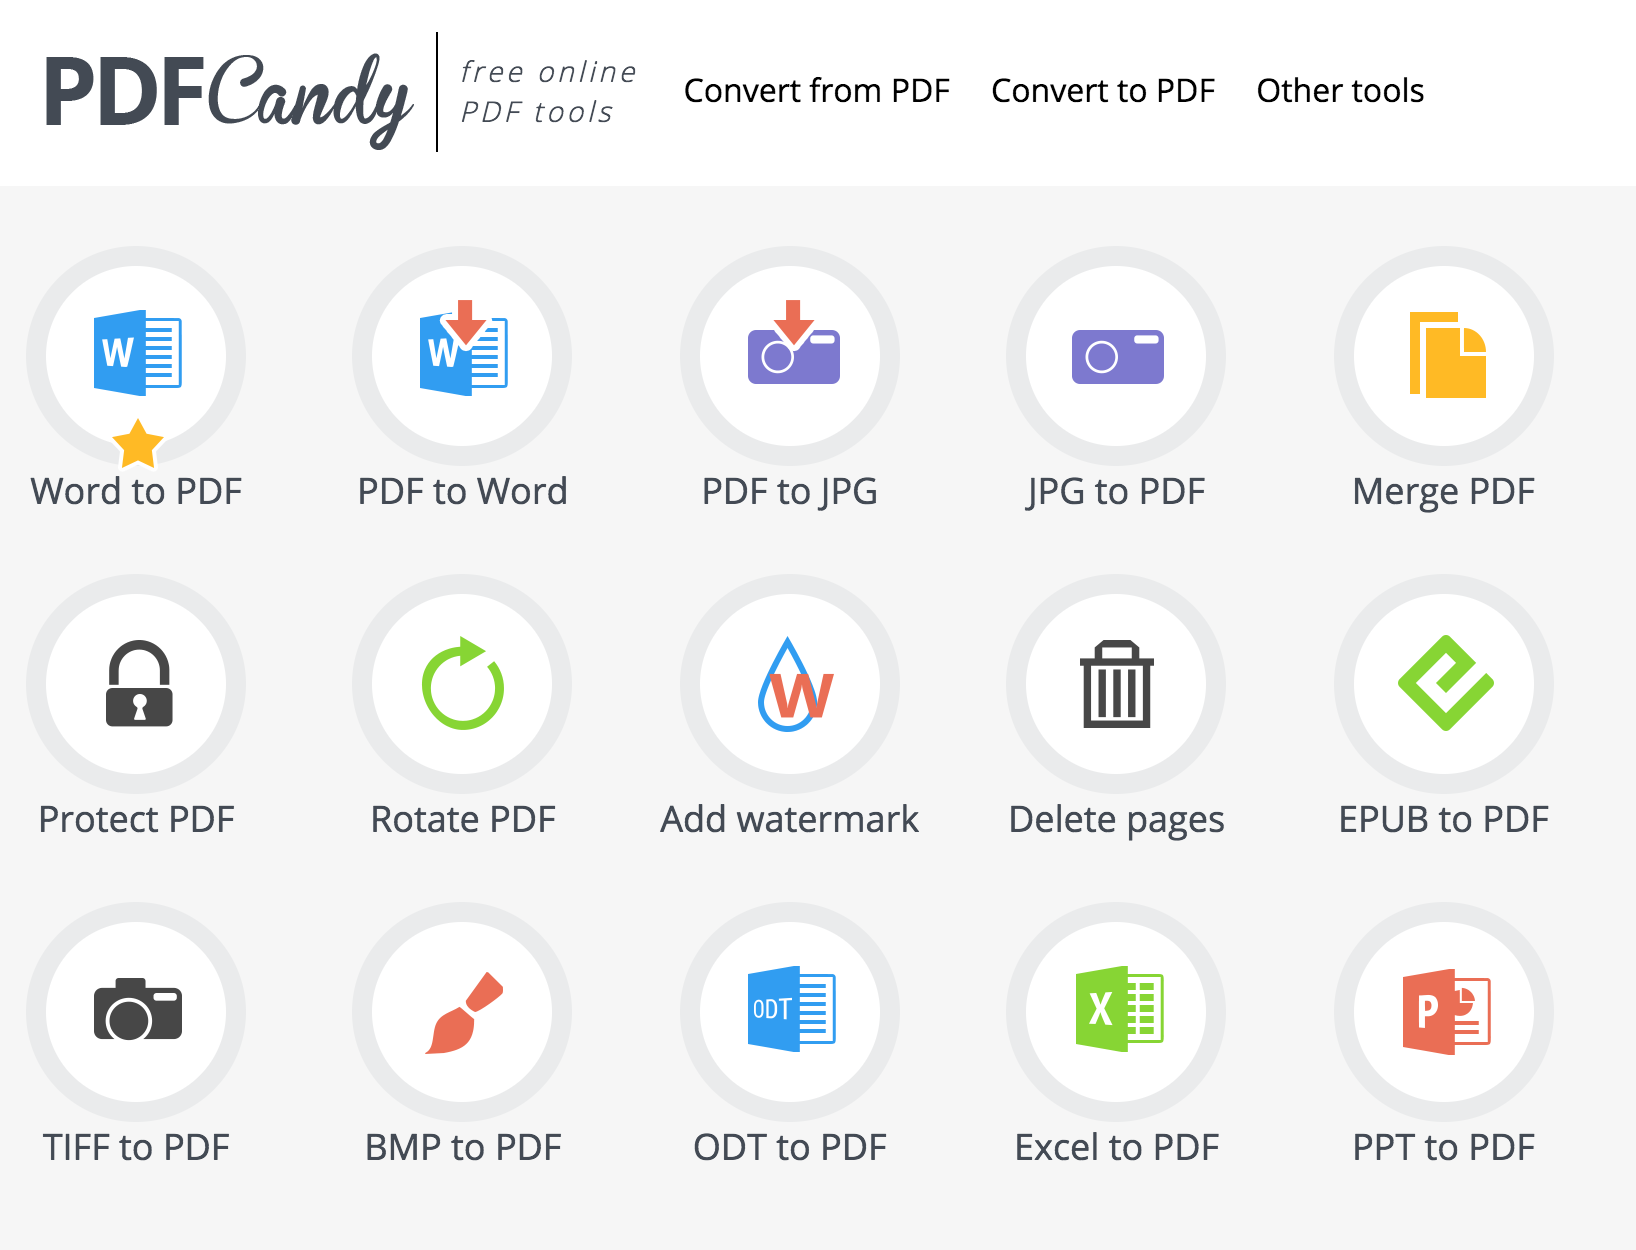 Features of PDF Candy